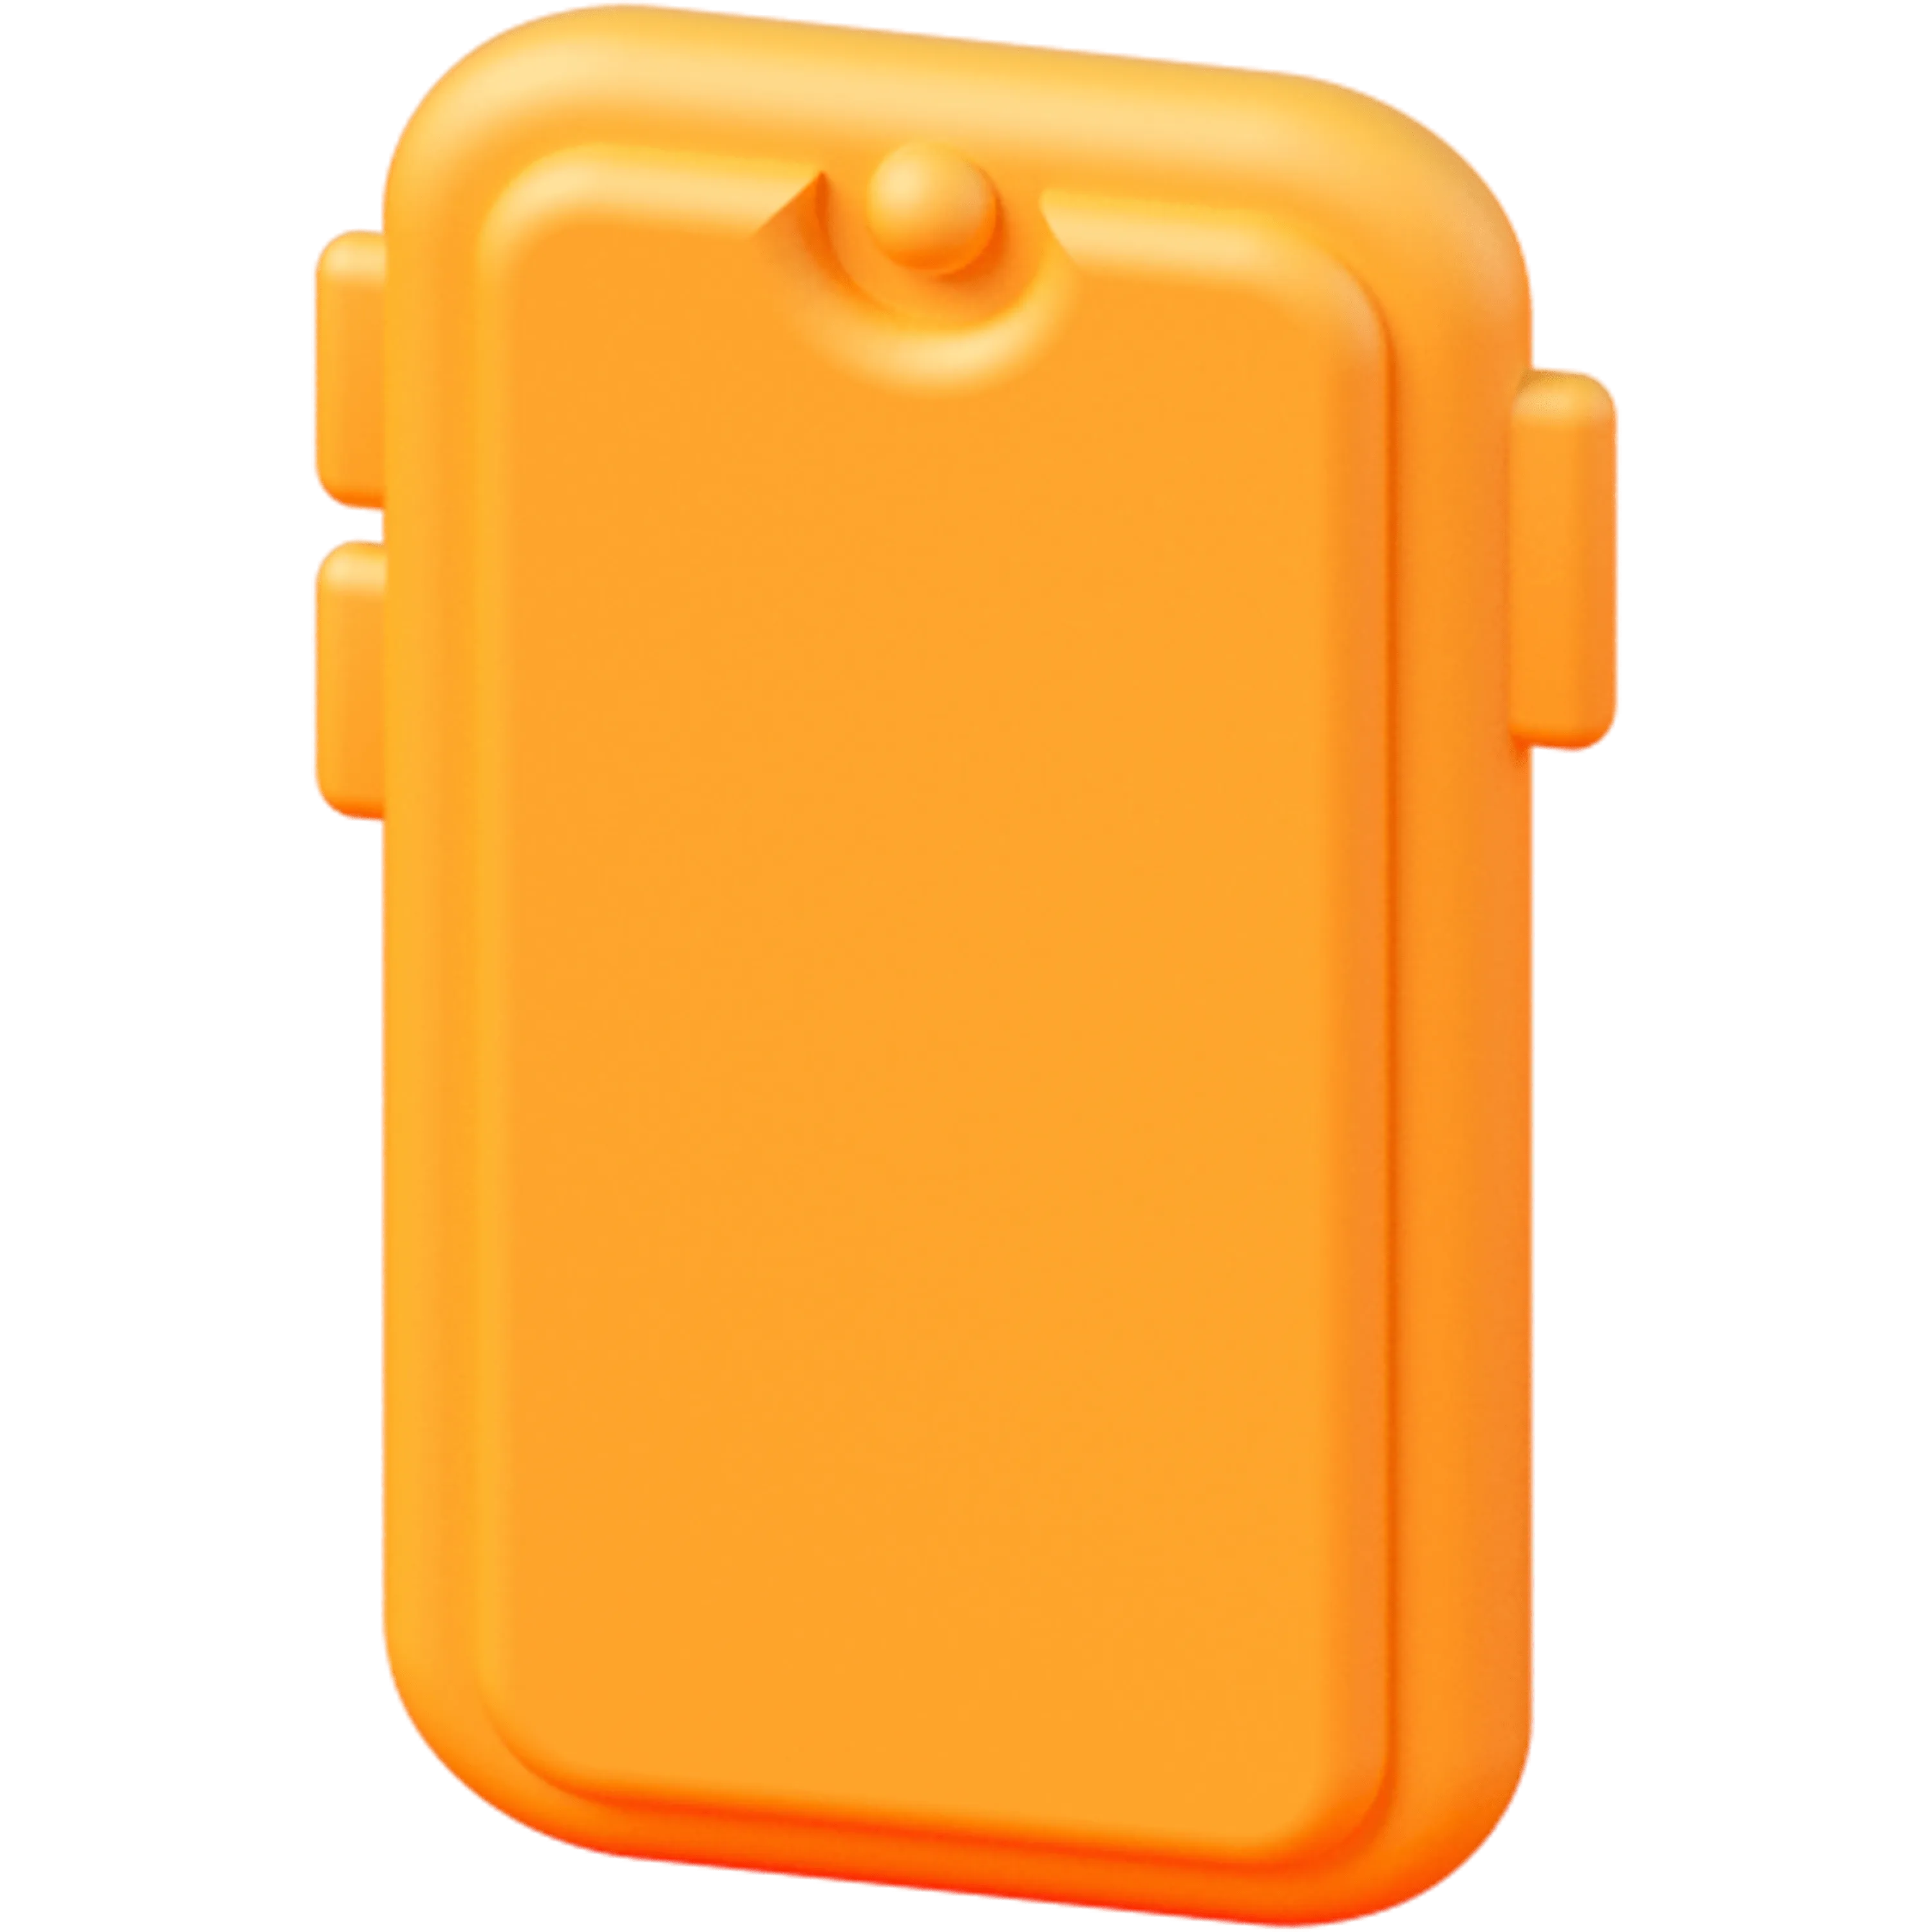 A 3D orange-red phone icon.